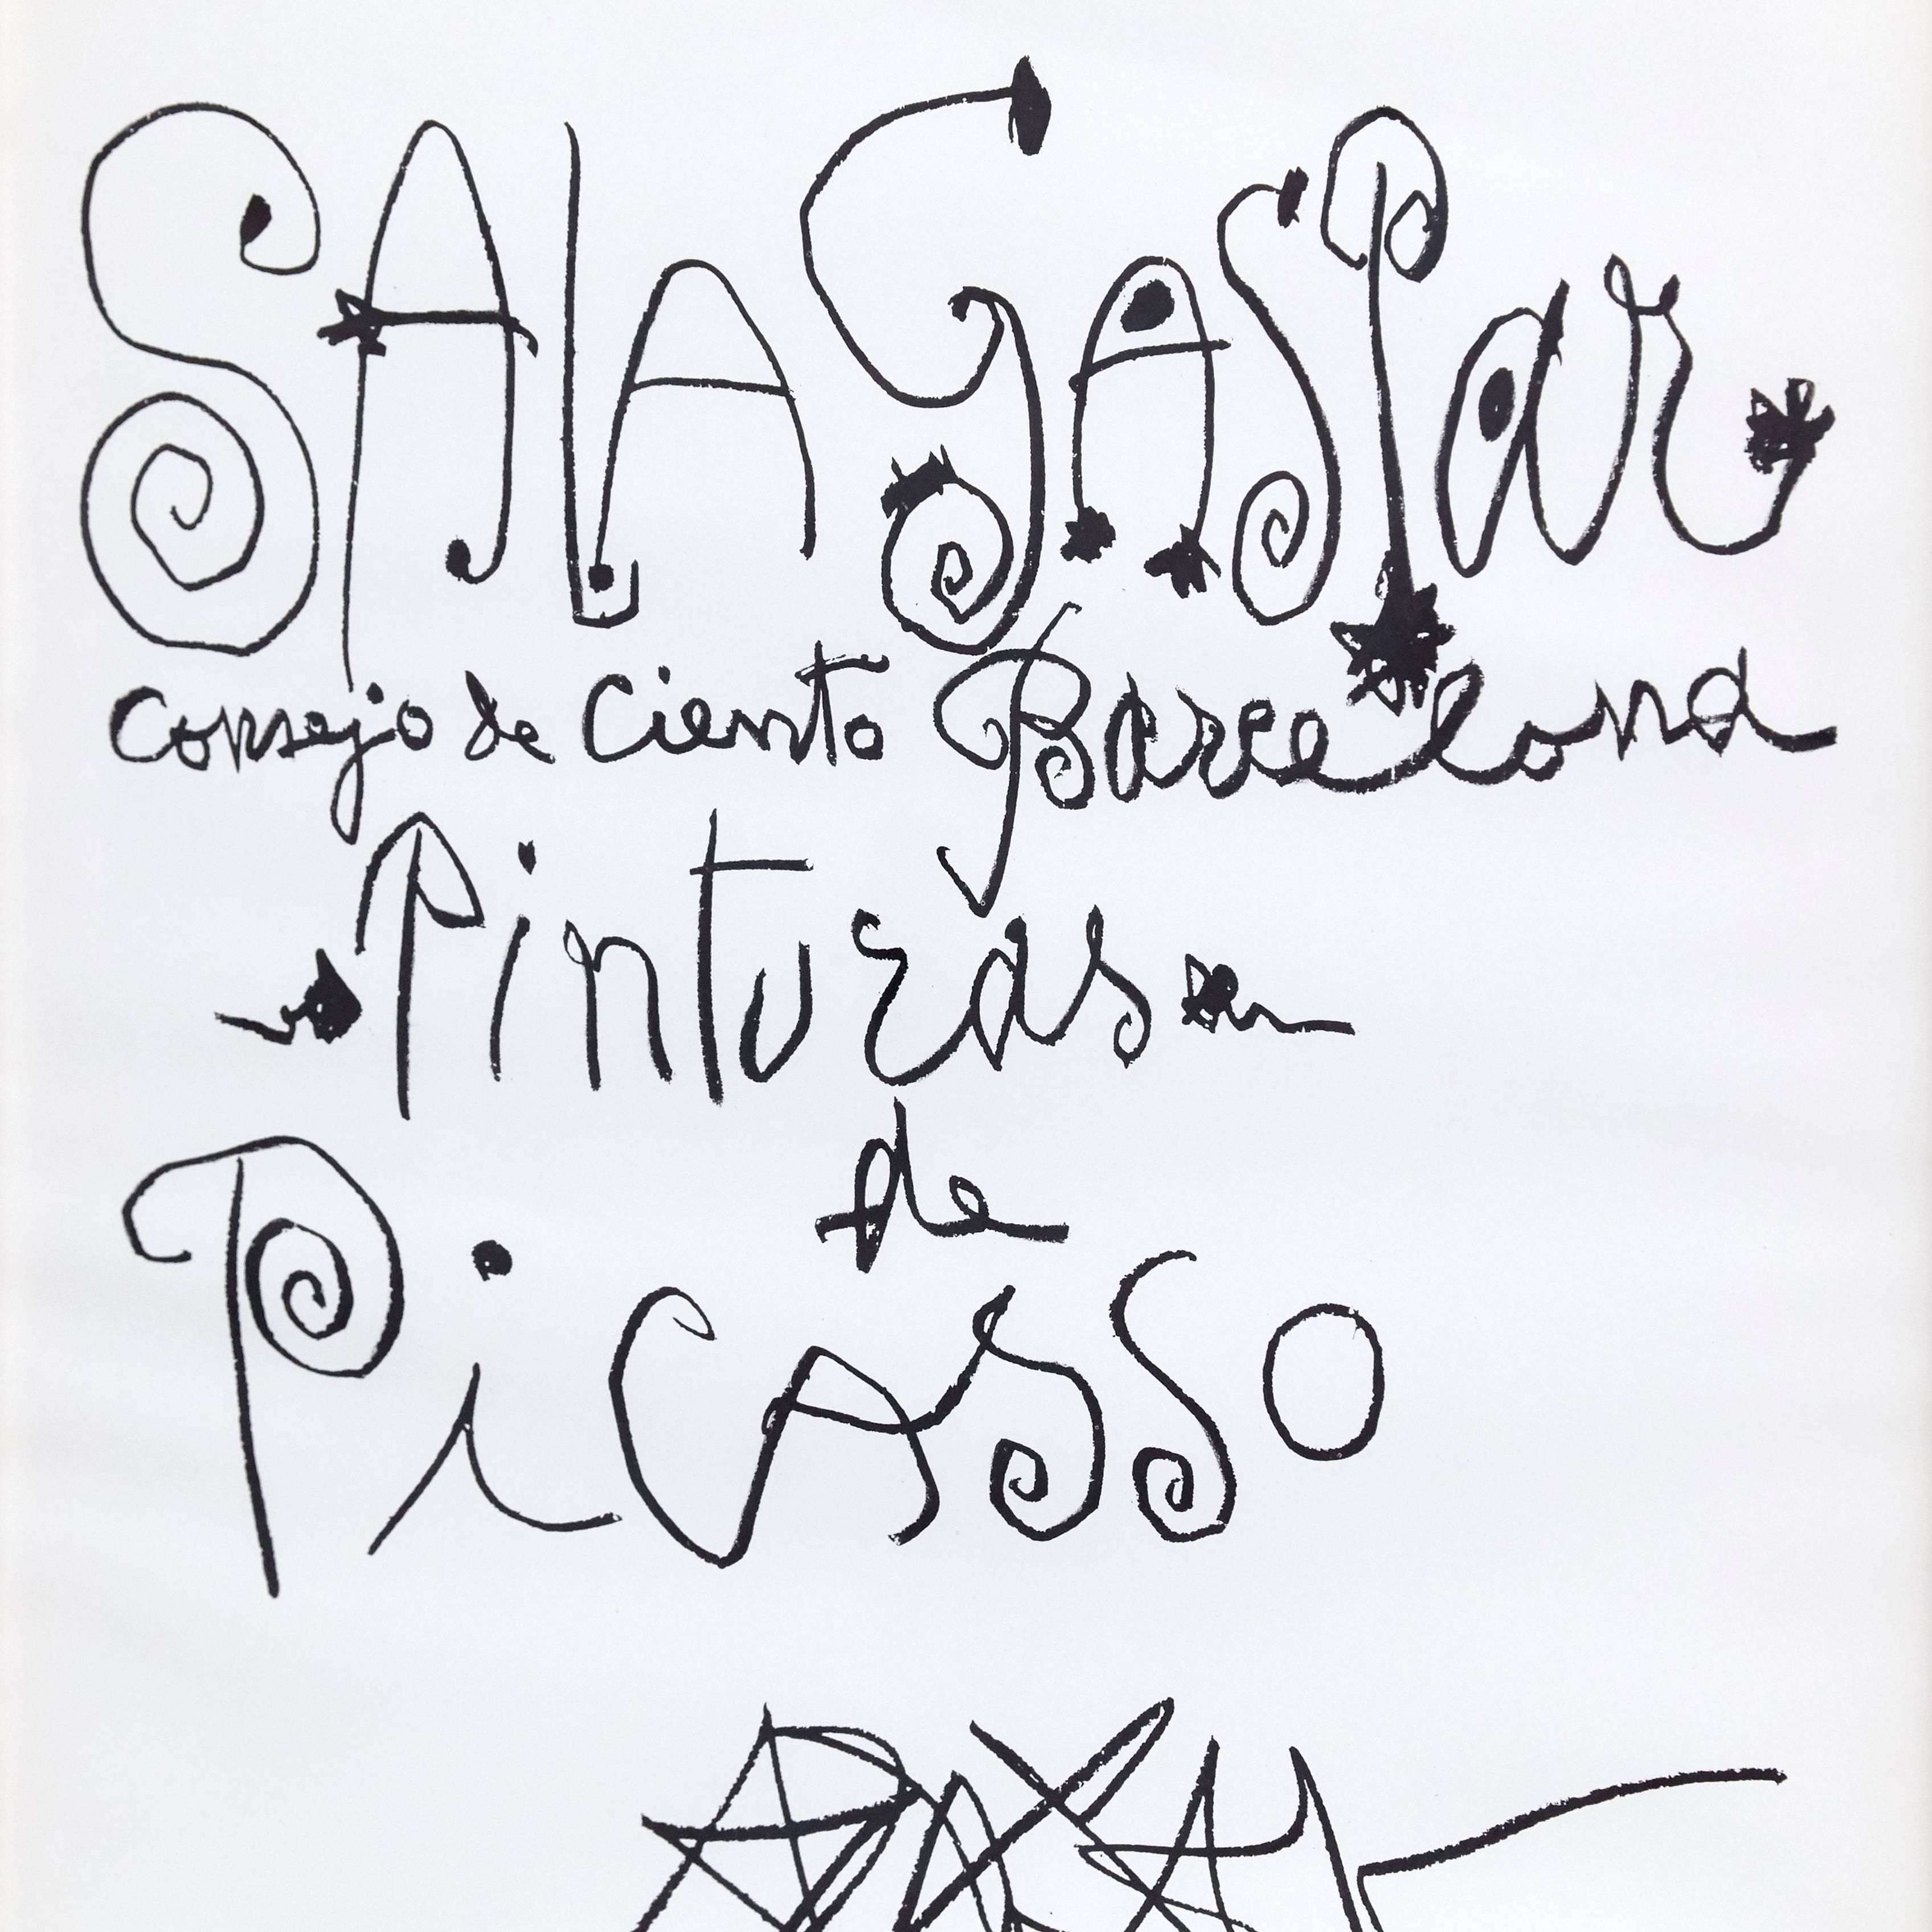 Original poster by Pablo Picasso, 1960.
Transfer lithograph by the artist for an exhibition of his paintings at the gallery Sala Gaspar in Barcelona.
Limited edition of 500. 
Catalogue Raisonne: Czwiklitzer 40; Reuss 767
Printed by Foto-Repro,